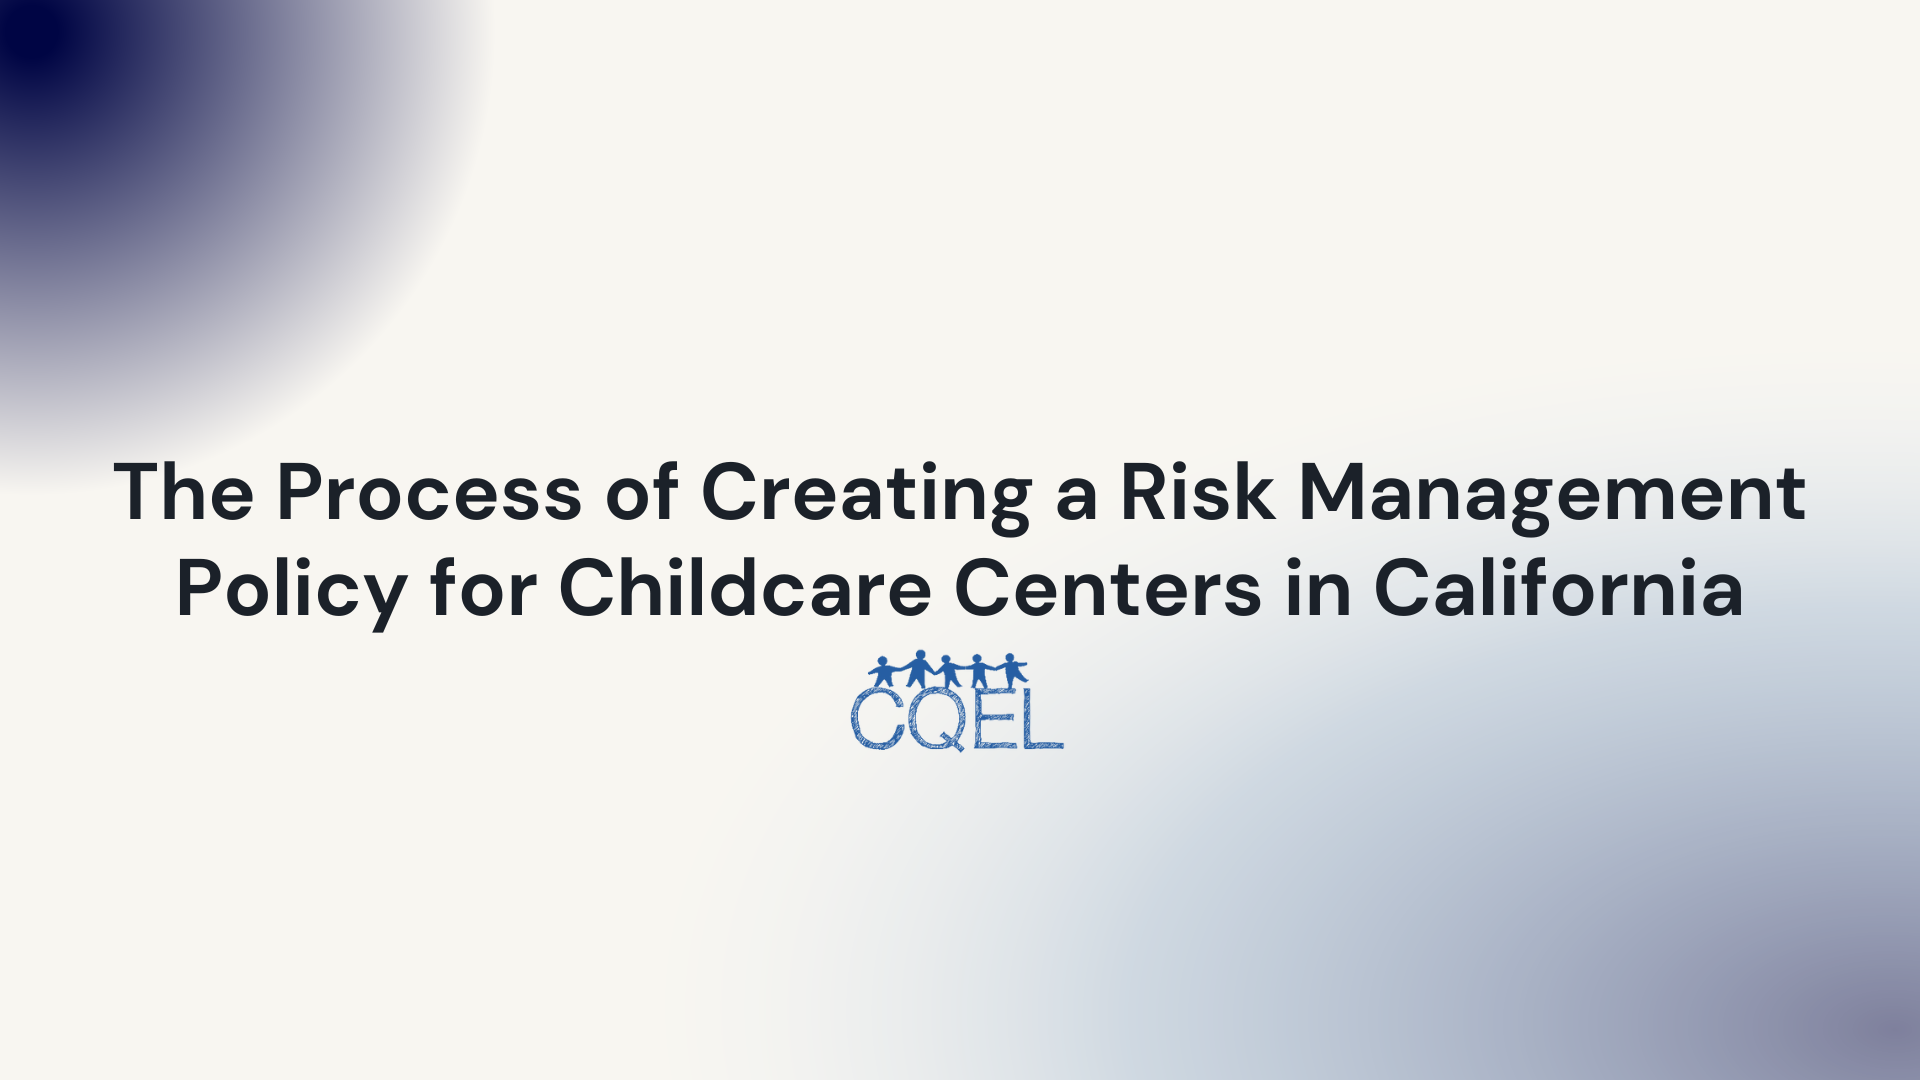 The Process of Creating a Risk Management Policy for Childcare Centers in California